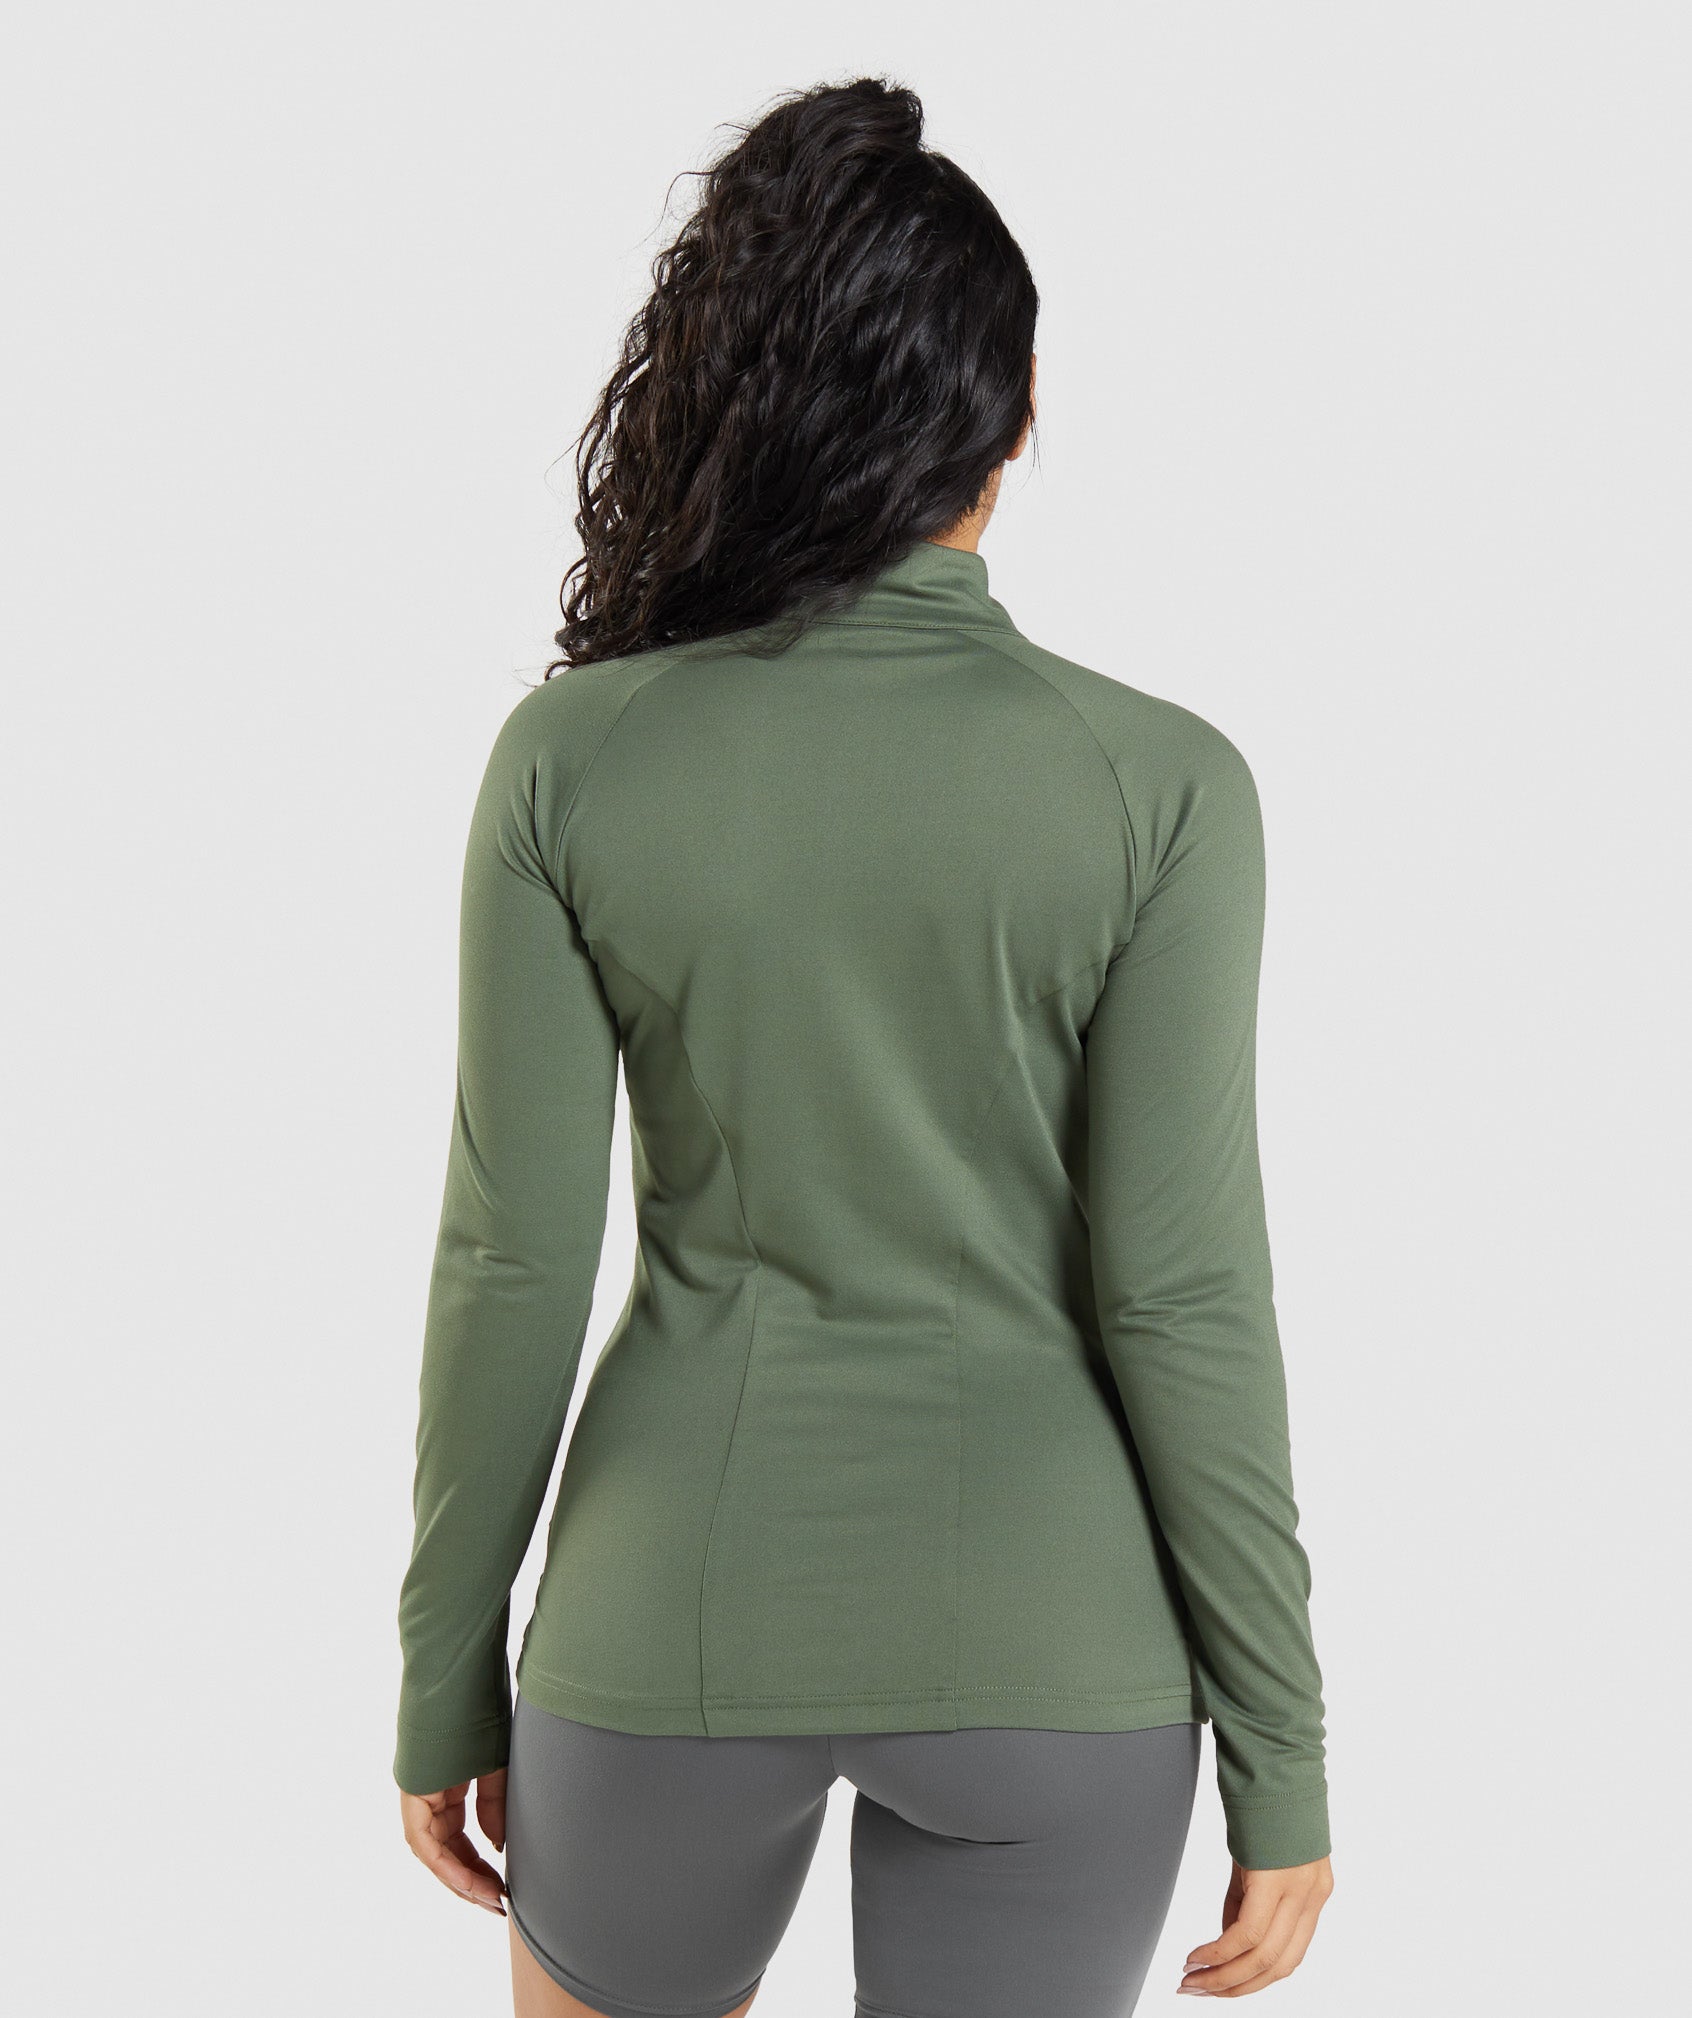 Training Jacket in Core Olive - view 2